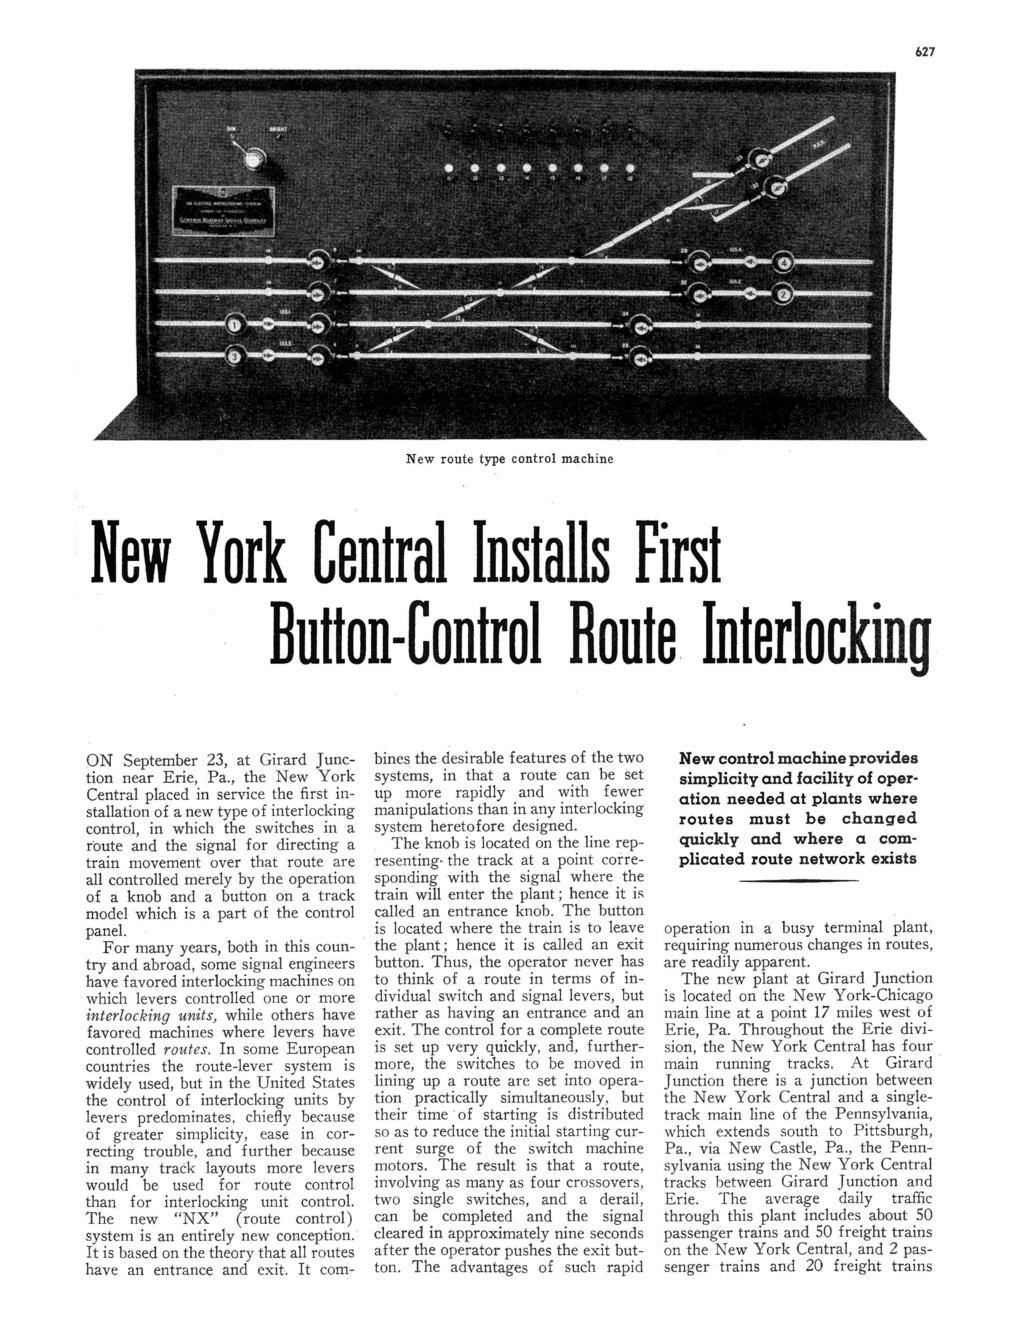 627 New route type control machine New York Central Installs First Button-Control Route Interlocking ON September 23, at Girard Junction near Erie, Pa.